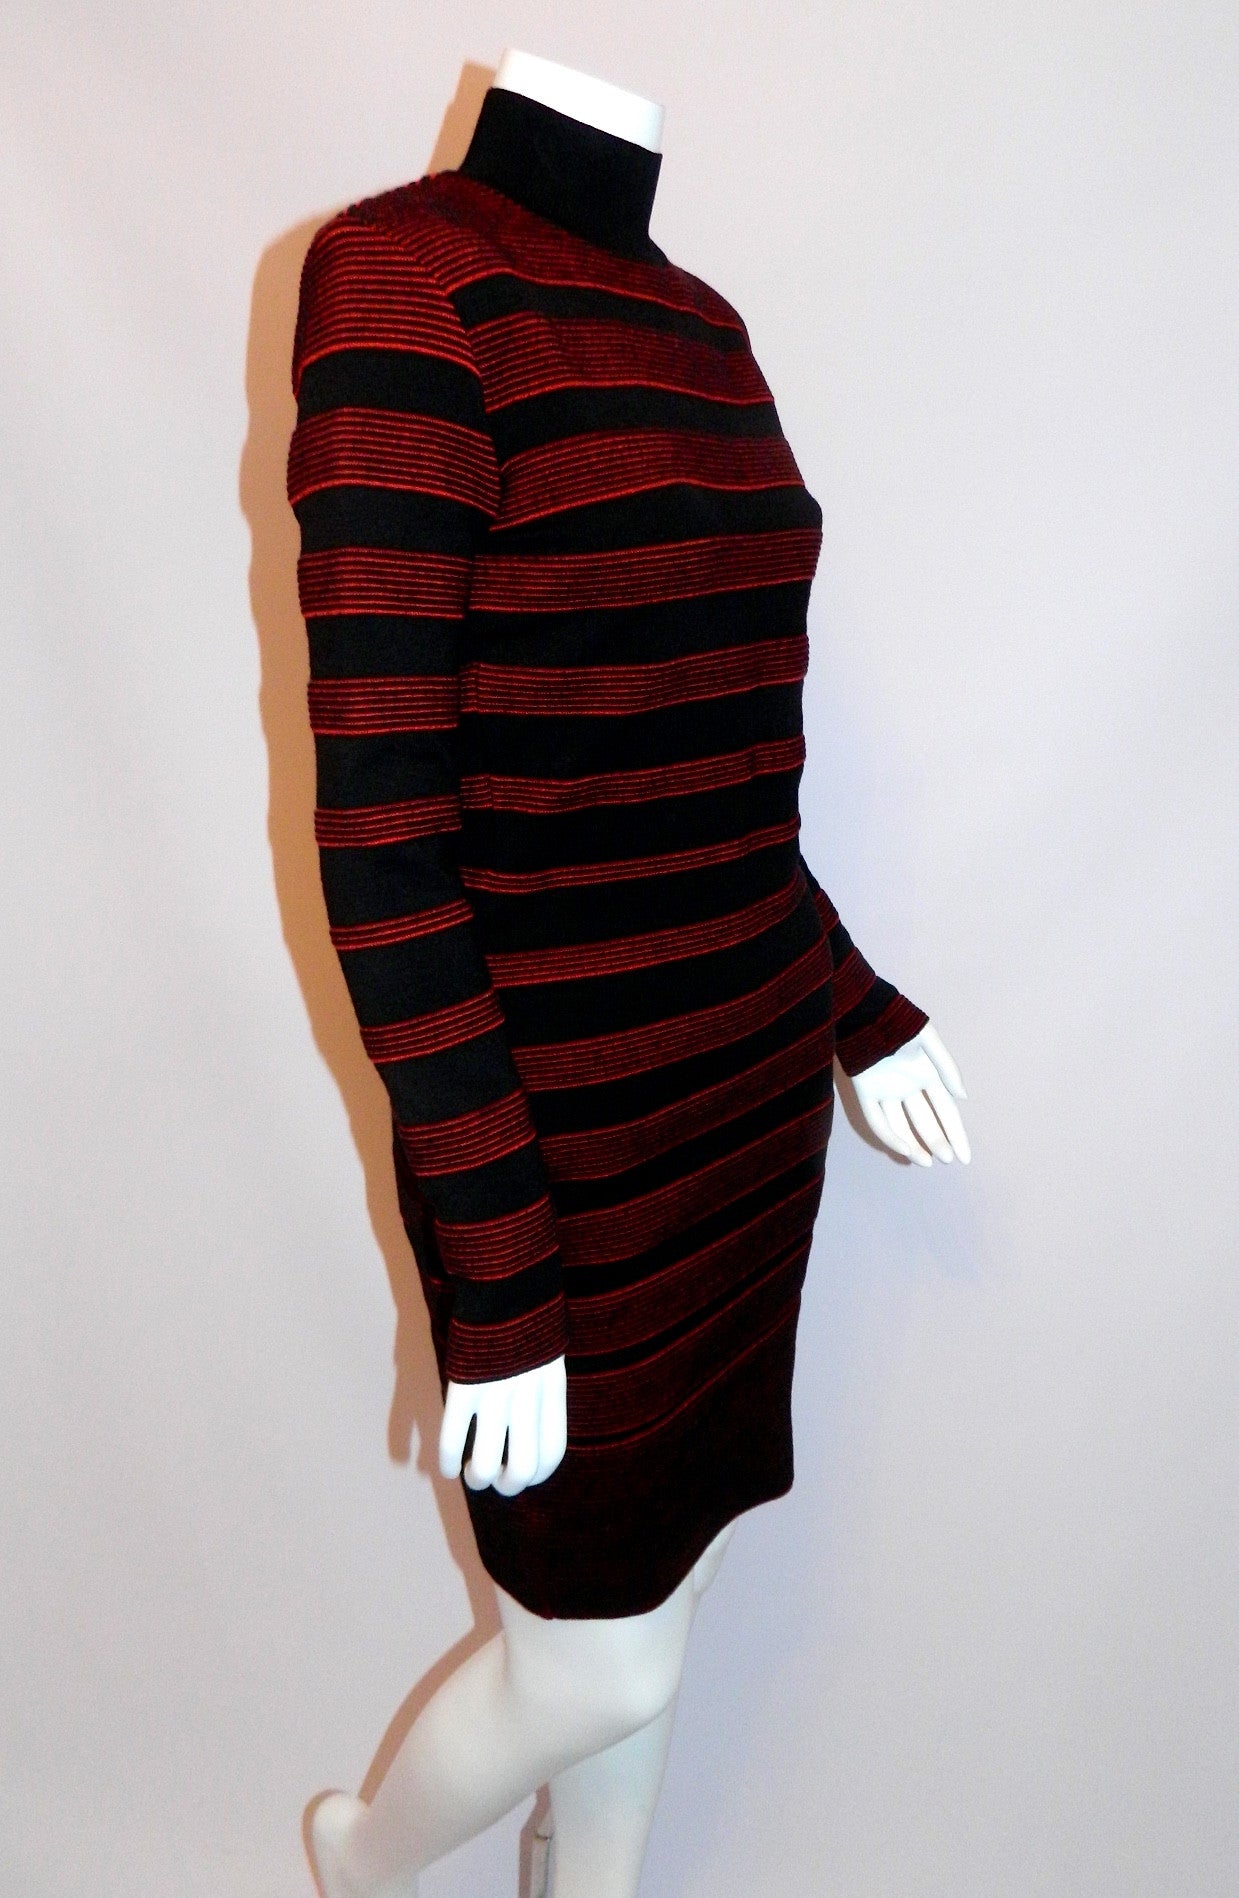 vintage 1980s dress Thierry Mugler by Alaia Bandage wool Body Con knit OSFM